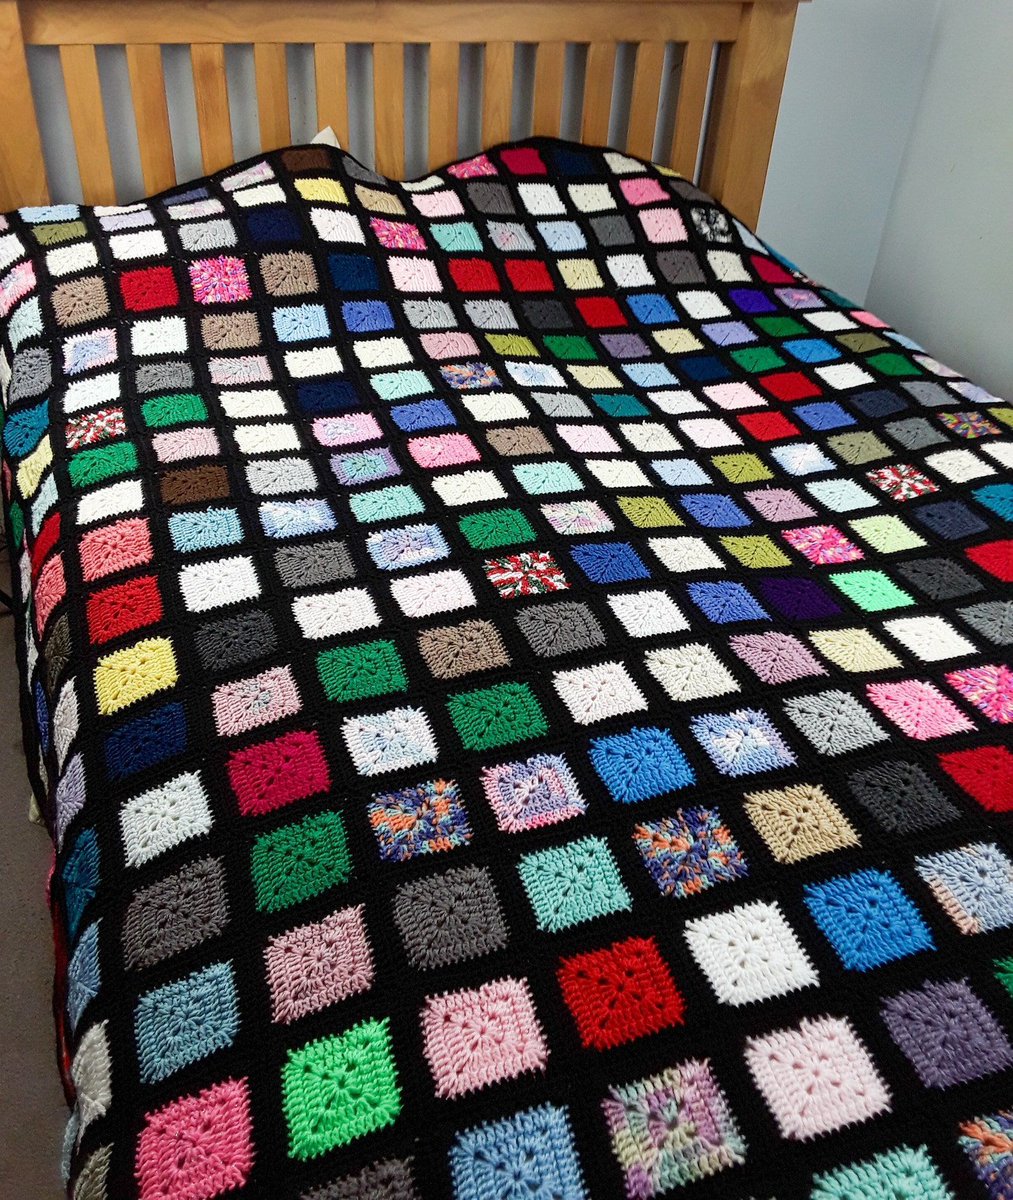 Warm up your home with this king size, hand crocheted, vintage-style granny square blanket. Traditional craftsmanship meets cozy comfort! #handmade #vintagestyle knittingtopia.etsy.com/listing/169323… #knittingtopia #etsy #MHHSBD #craftbizparty #uksmallbiz #shophandmade